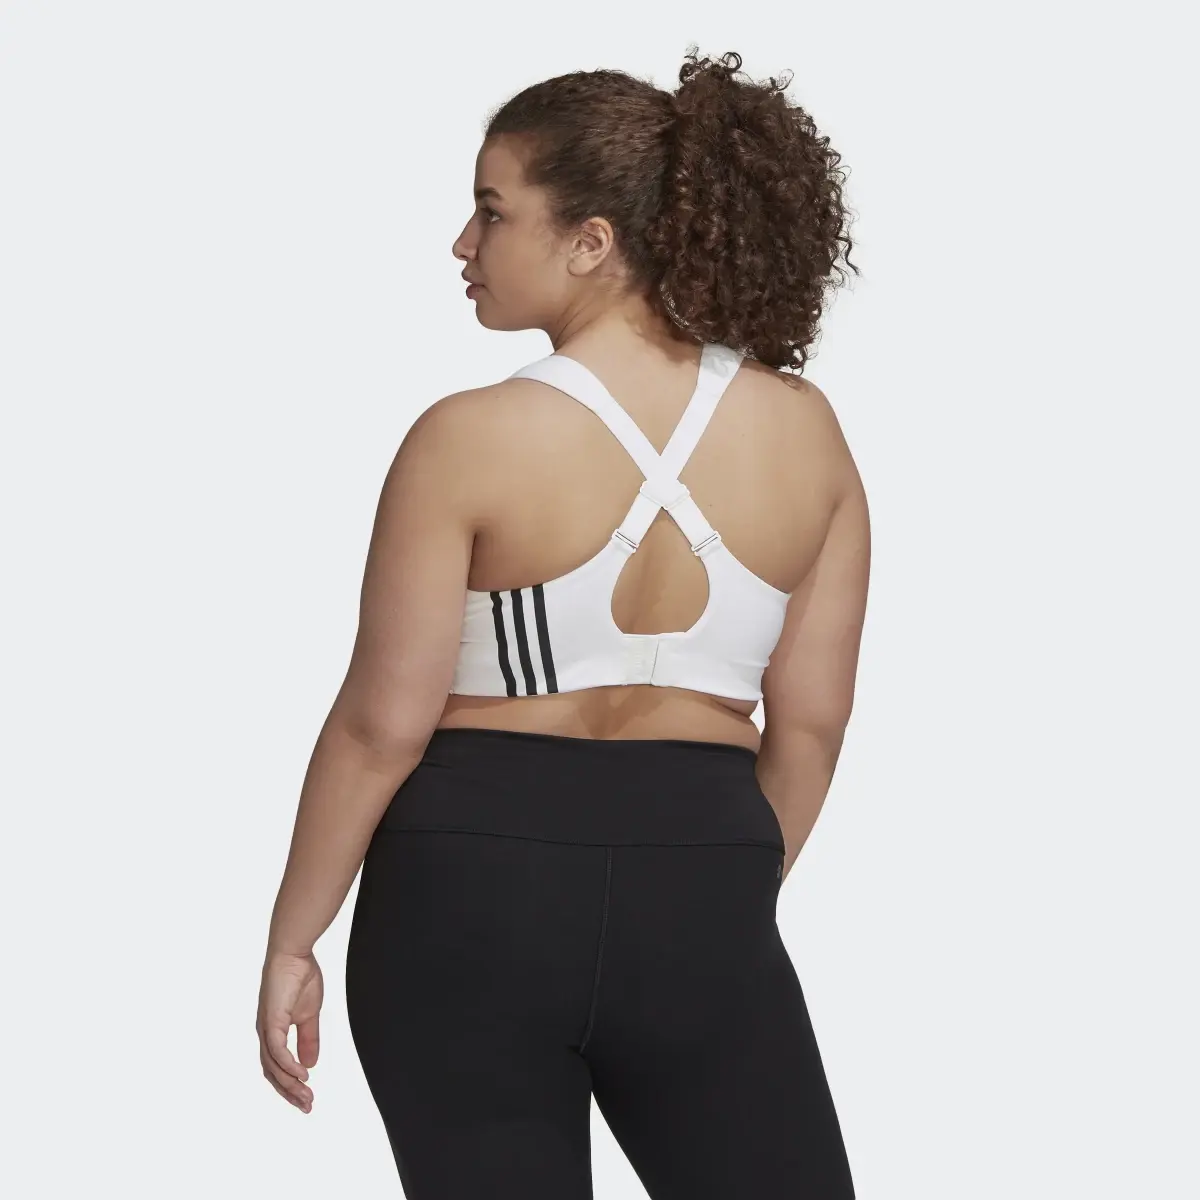 Adidas Brassière de training Maintien fort adidas TLRD Impact (Grandes tailles). 3